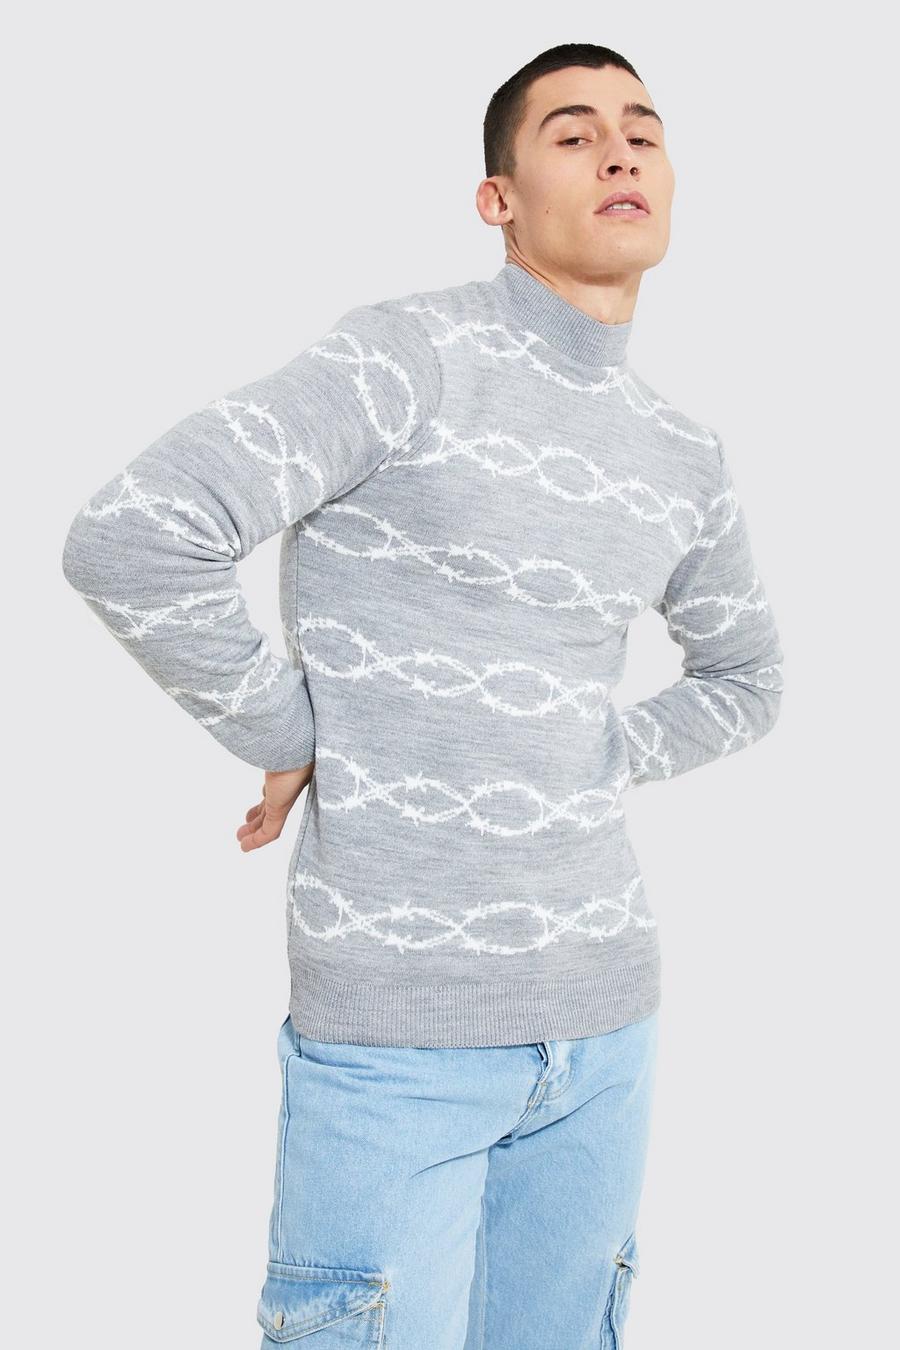 Grey marl grigio Turtle Neck Muscle Fit Barbed Wire Jumper